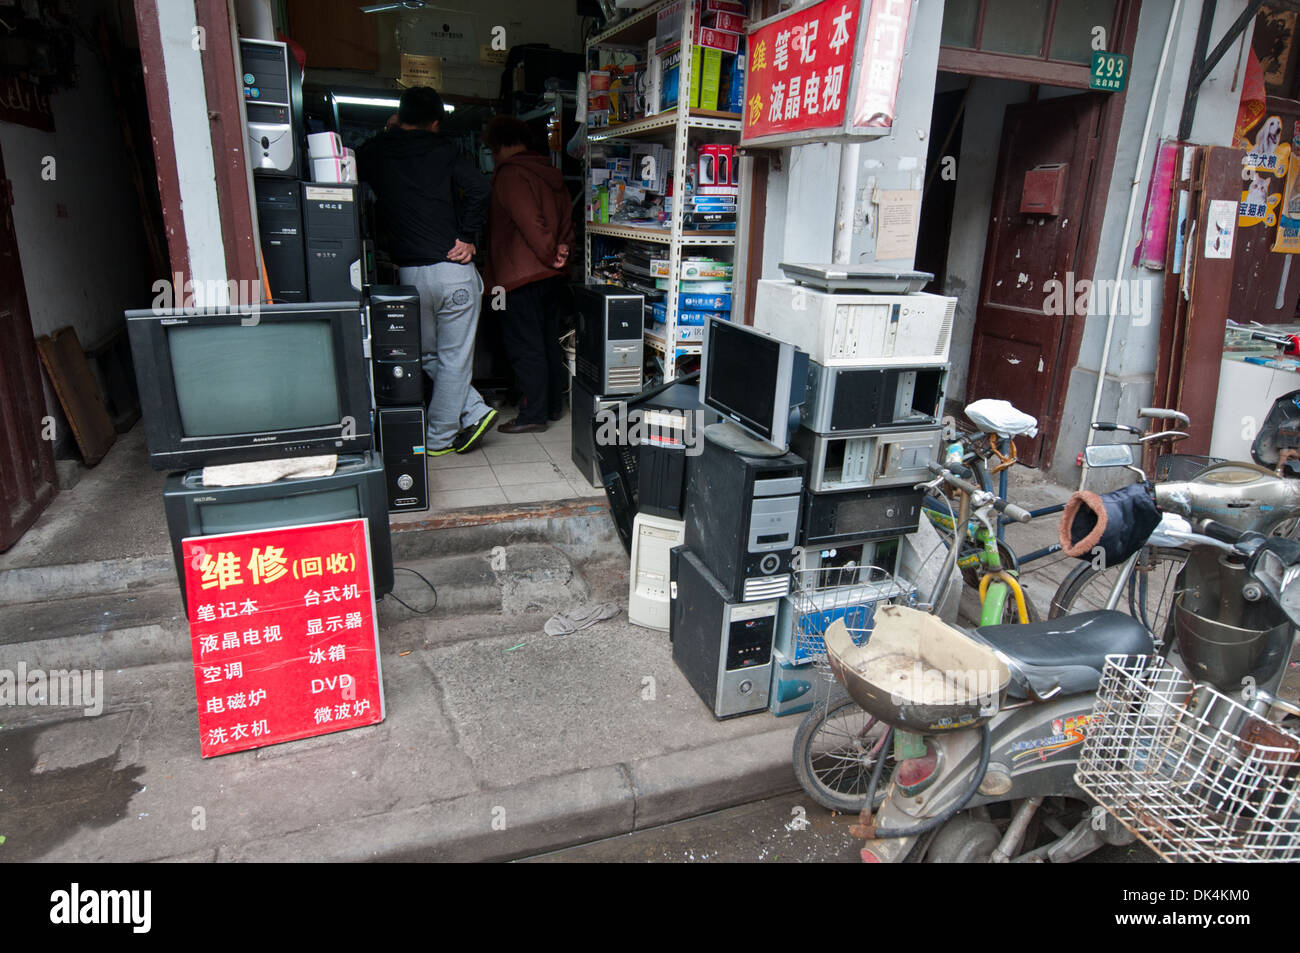 Small computer and electronics shop and service in Old Town (Nanshi), Shanghai, China Stock Photo